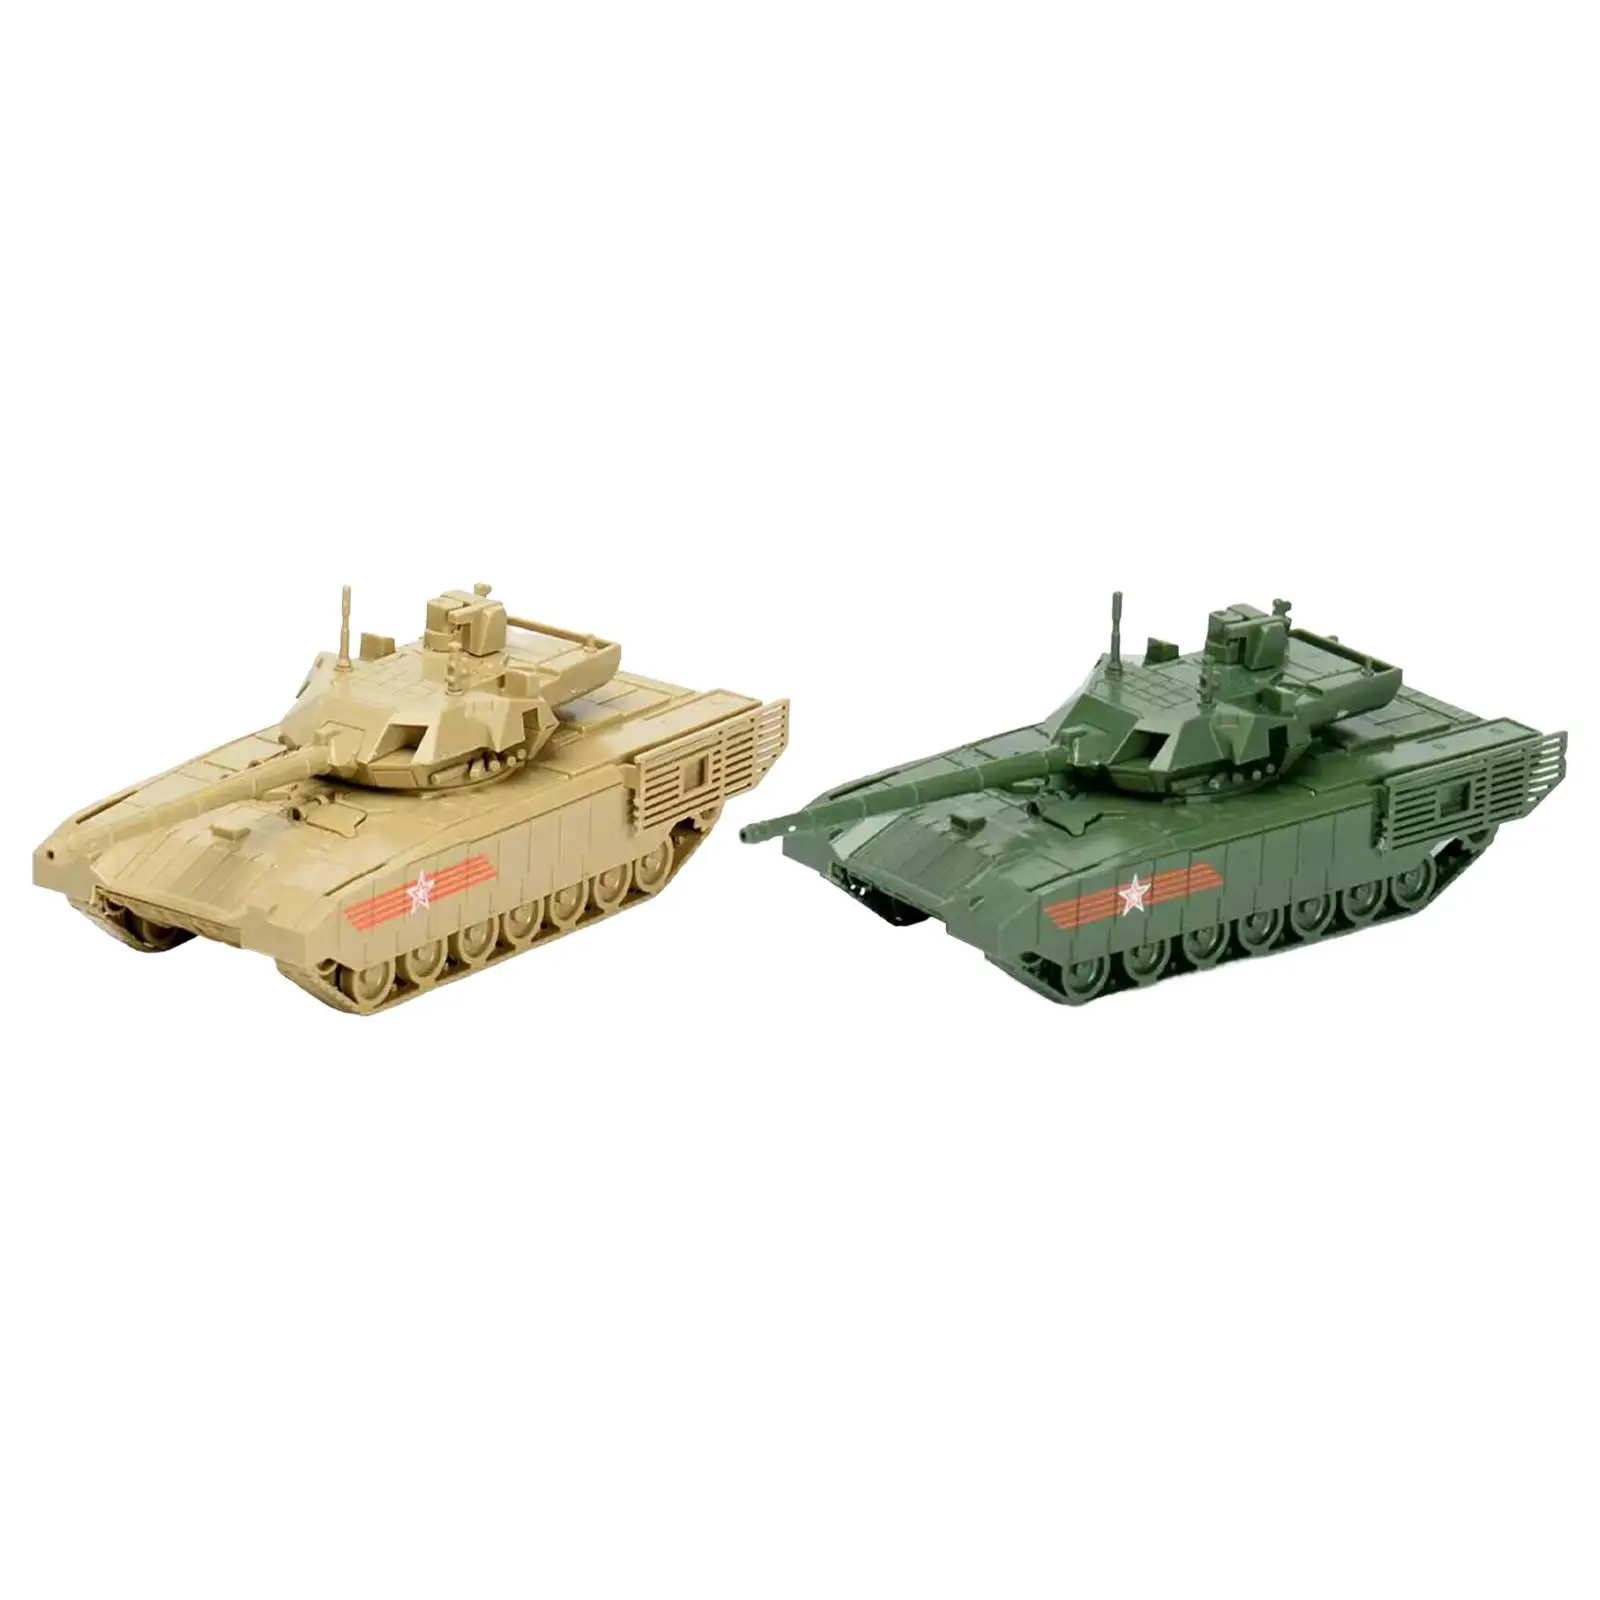 1/72 Tank Assembly Model Simulation Ornament Vehicle Tank Model Toy Chariots Tank for Children Girls Adults Boys Birthday Gift